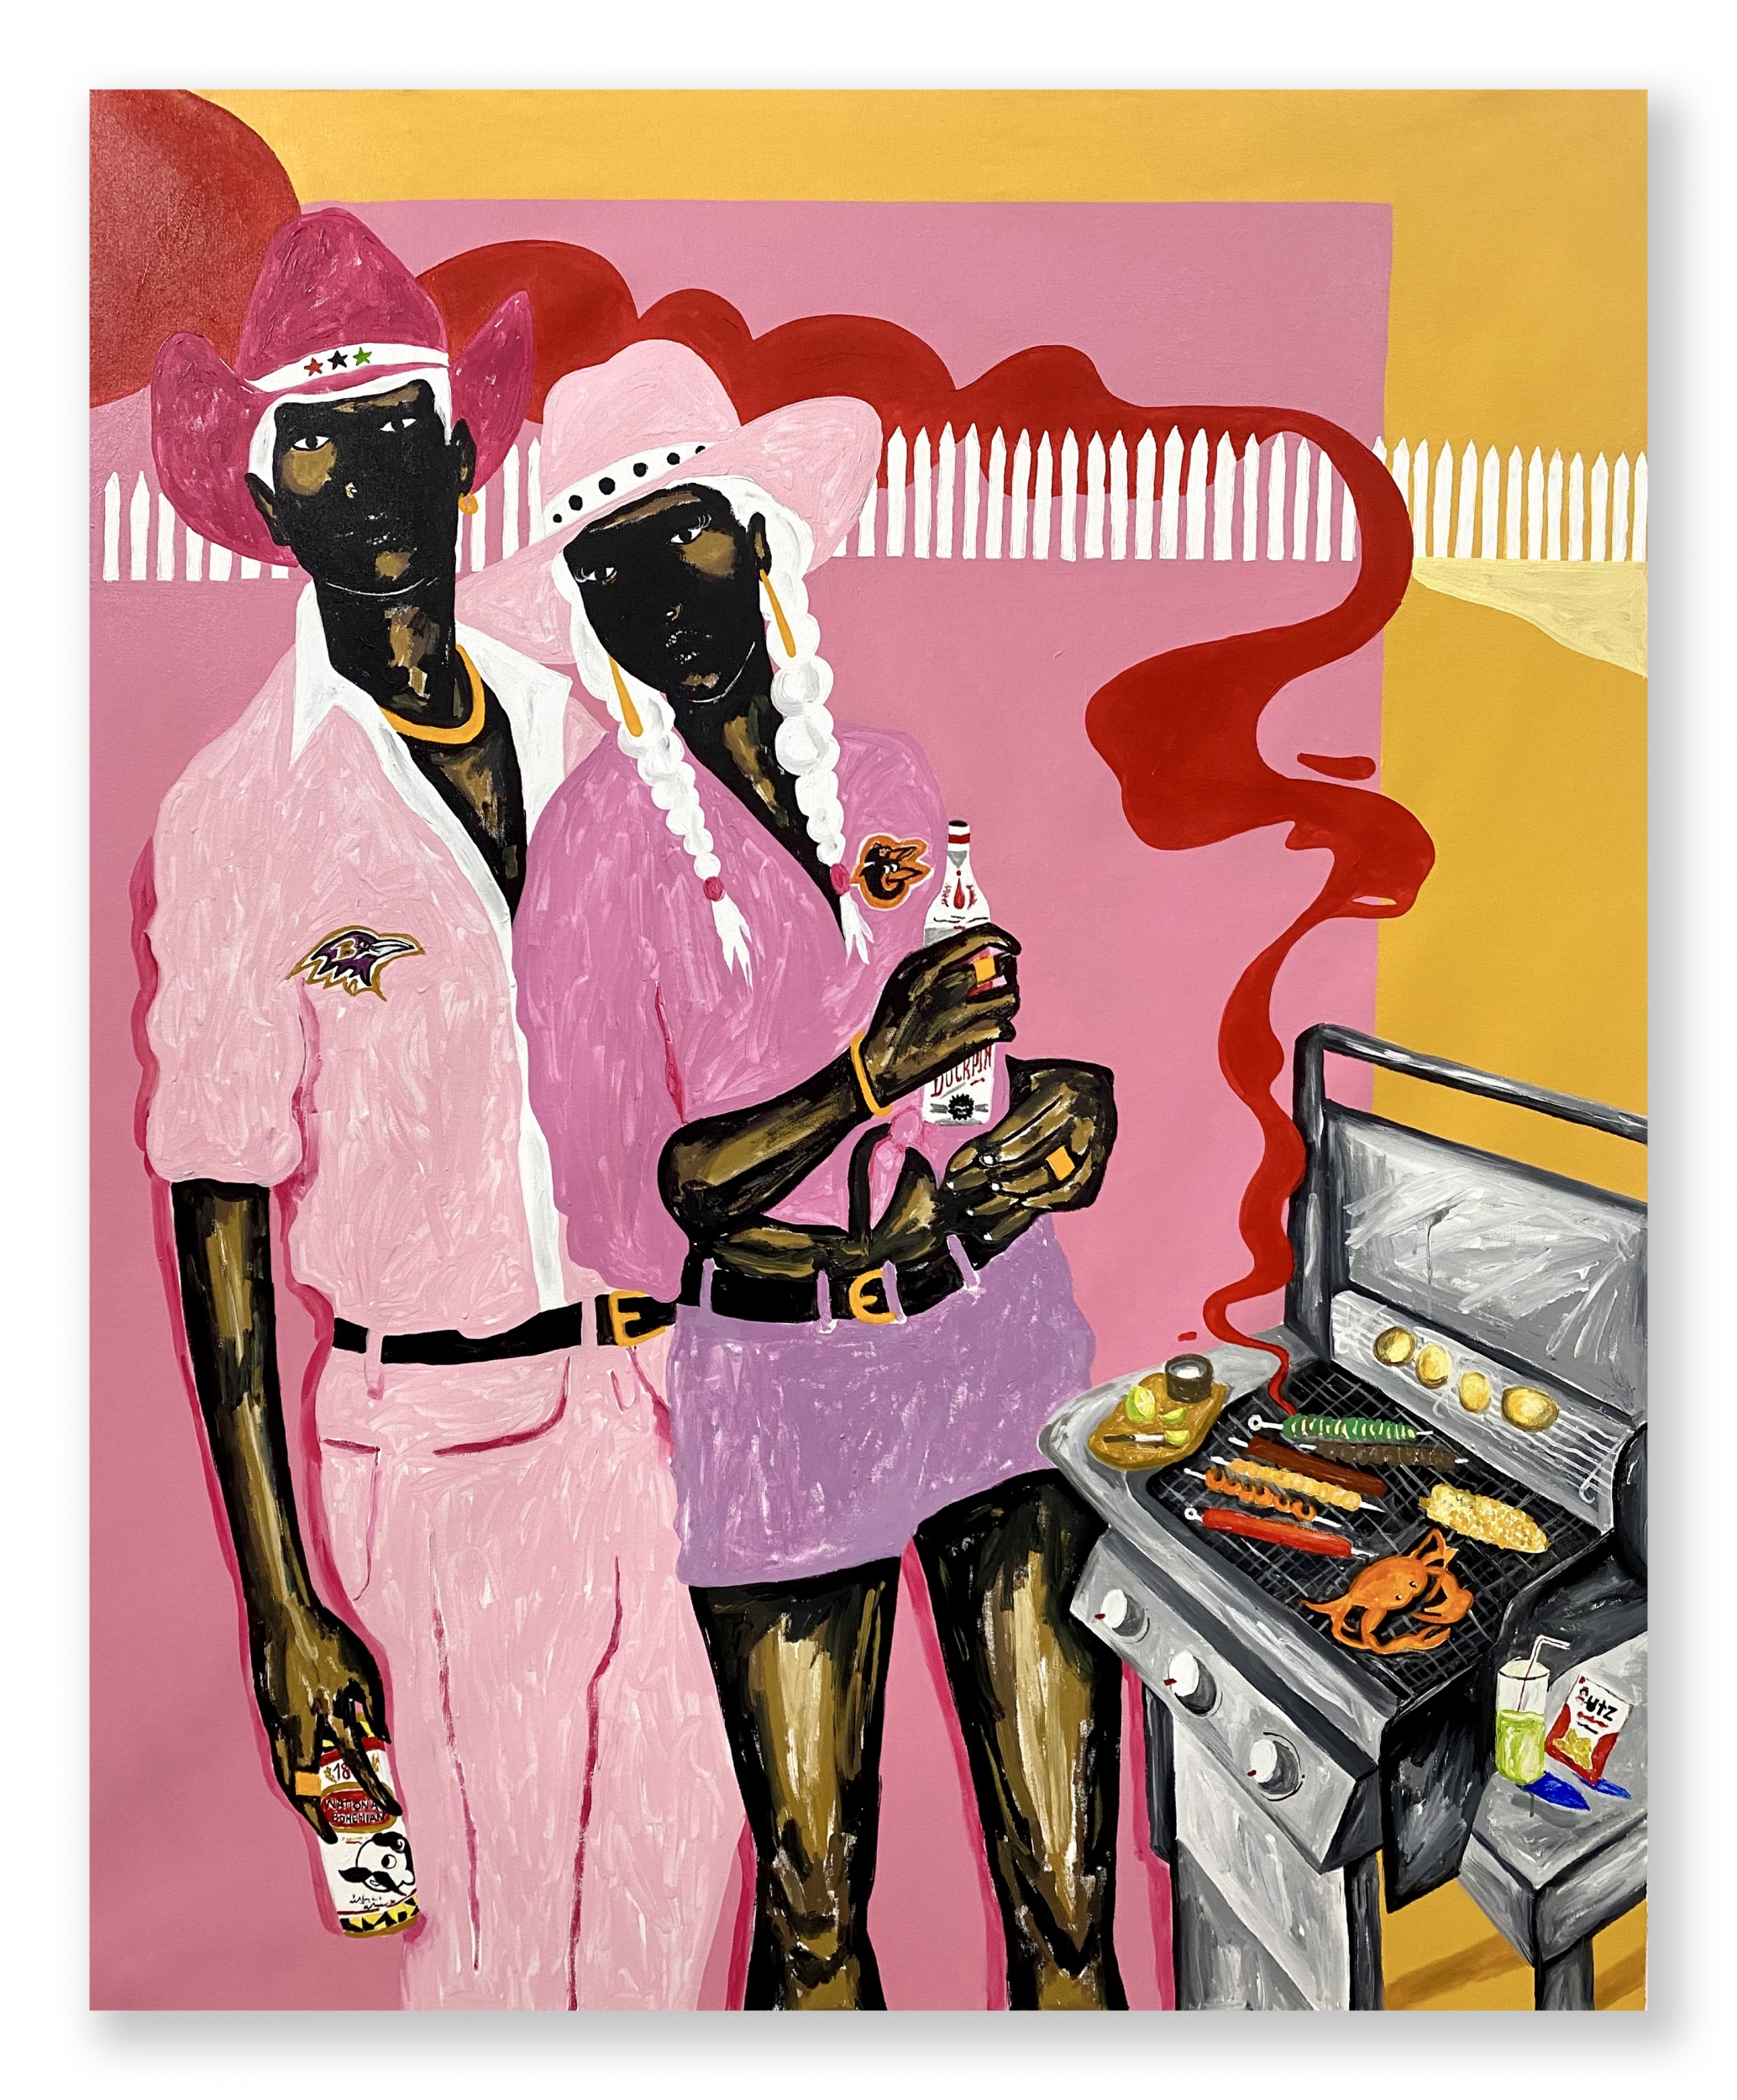 Artista Zeh Palito, Won't You Celebrate With Me, curated by Larry Ossei-Mensah (Luce Gallery, New York, NY) - Zeh Palito, Won't You Celebrate With Me, curated by Larry Ossei-Mensah (Luce Gallery, New York, NY)